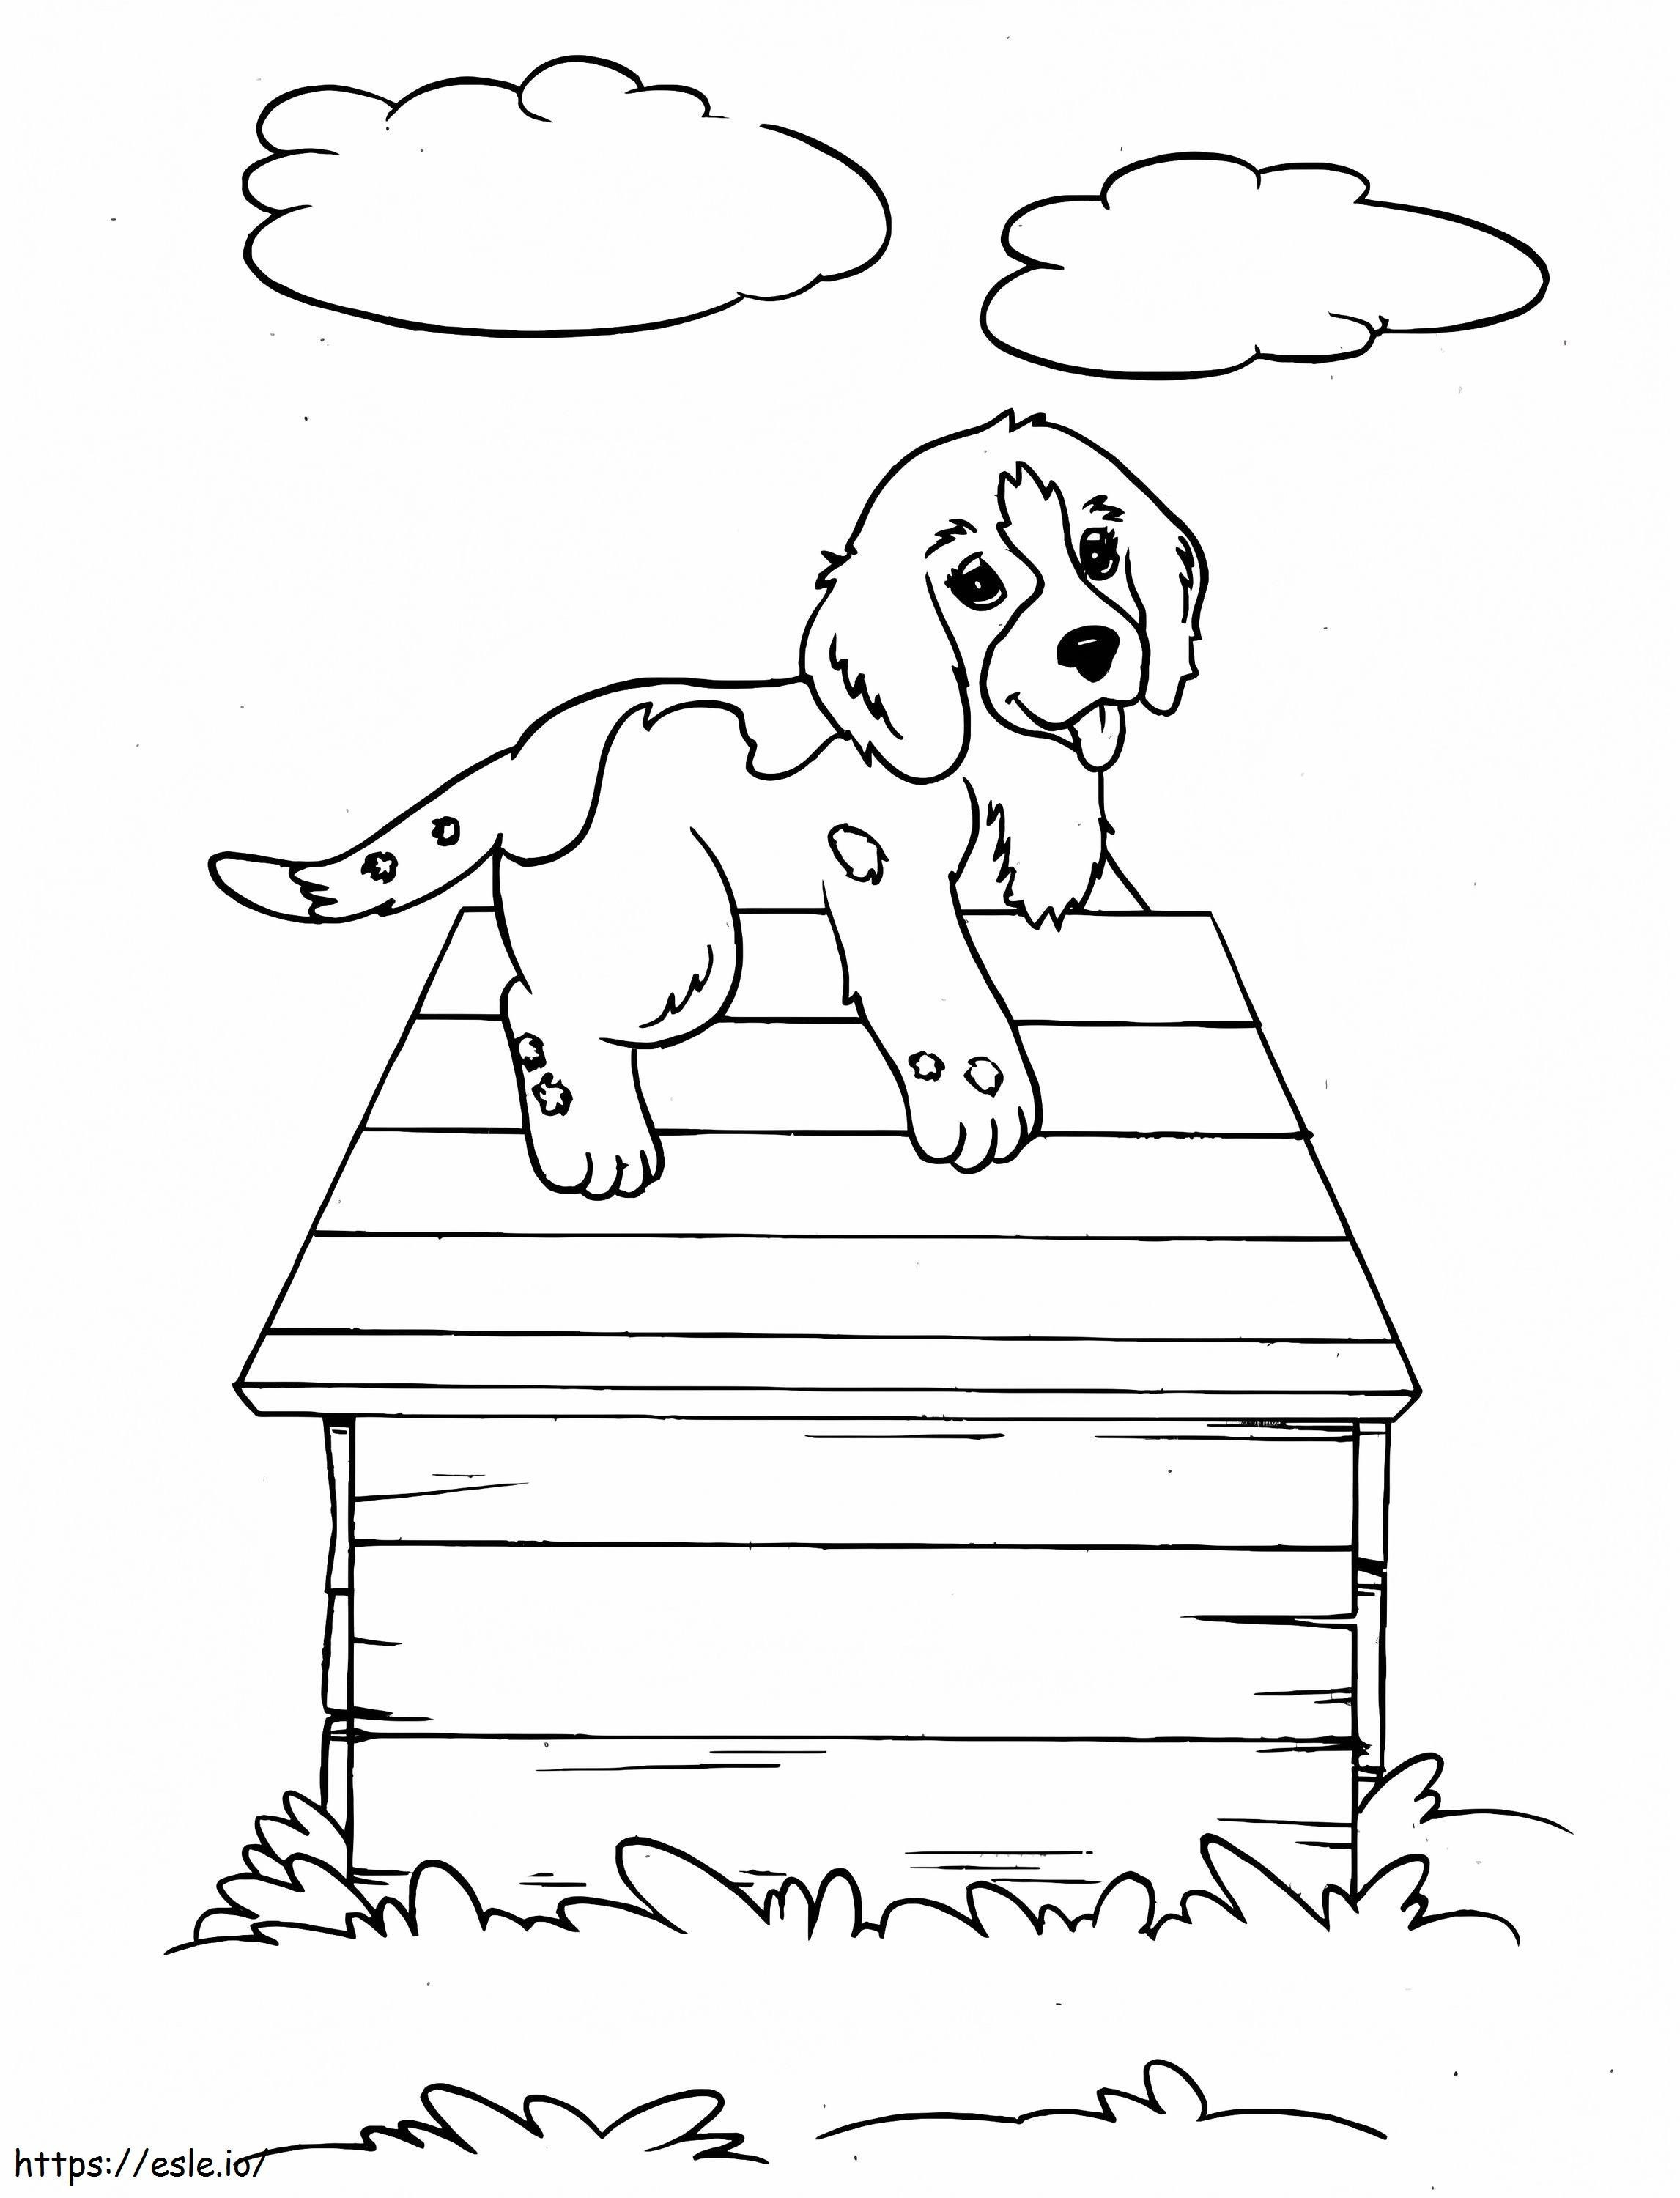 Puppy In A House coloring page